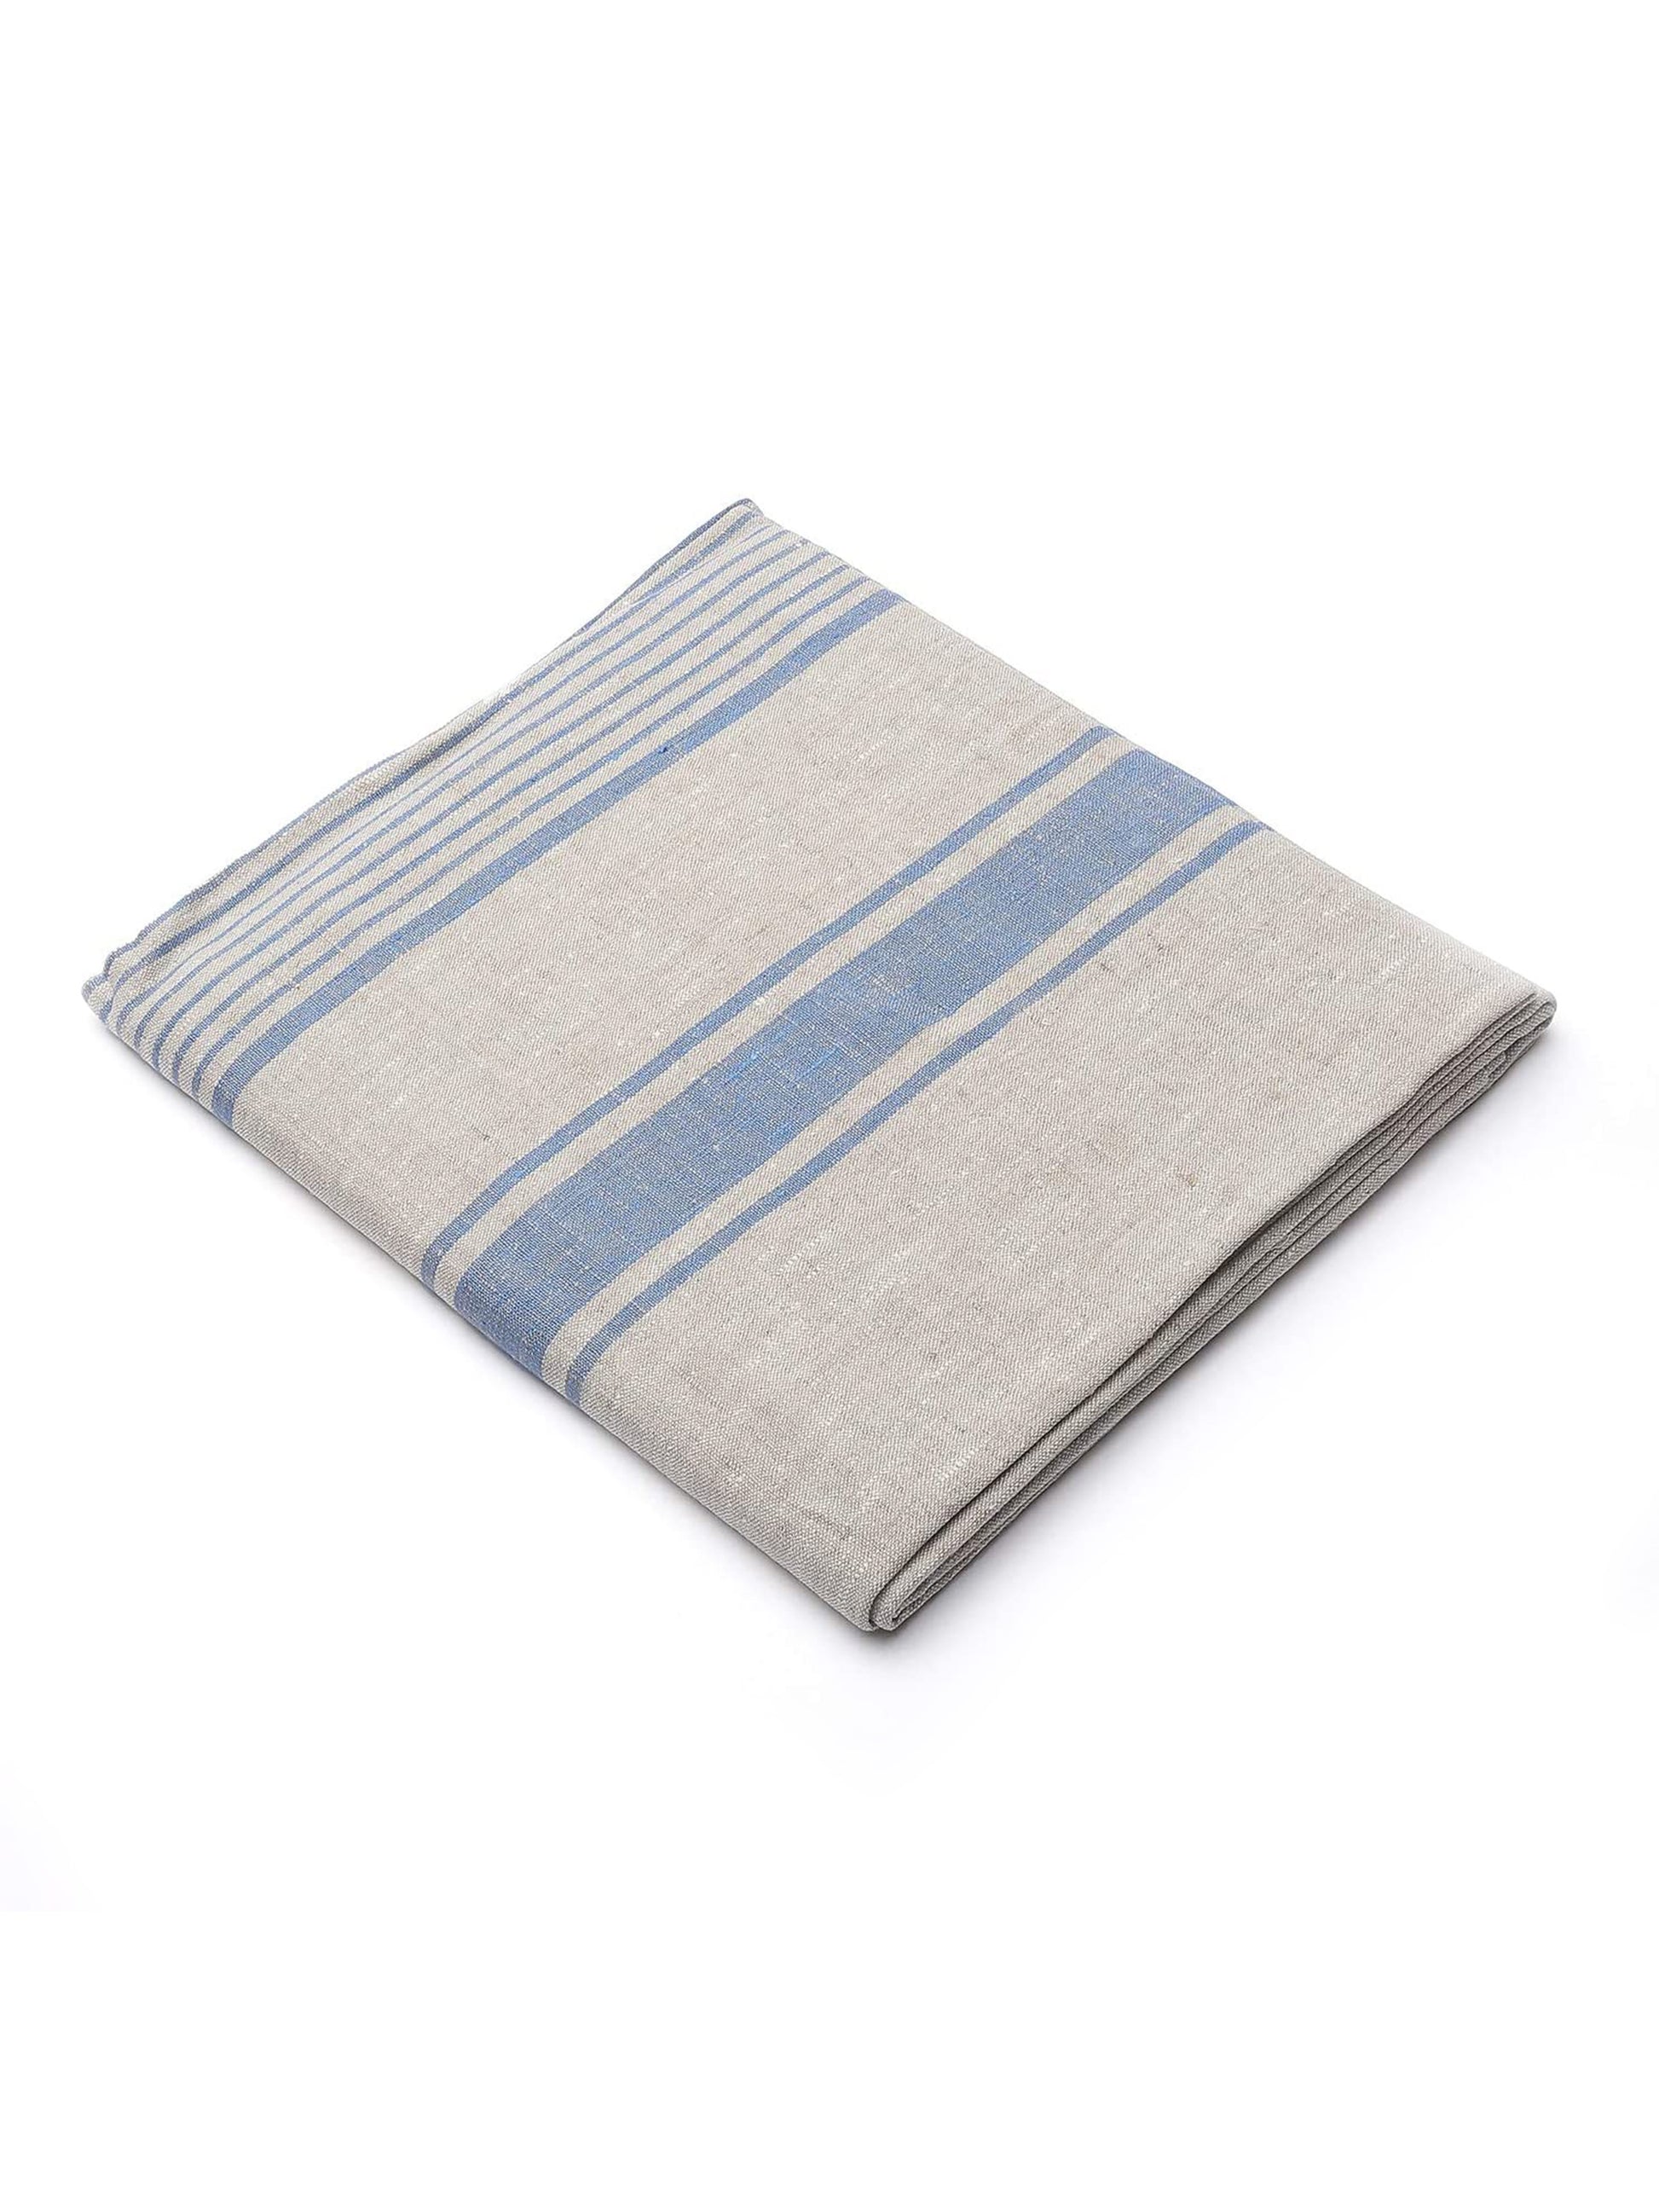 Provence Linen Collection Flax and Blue Stripe Tablecloth Weston Table